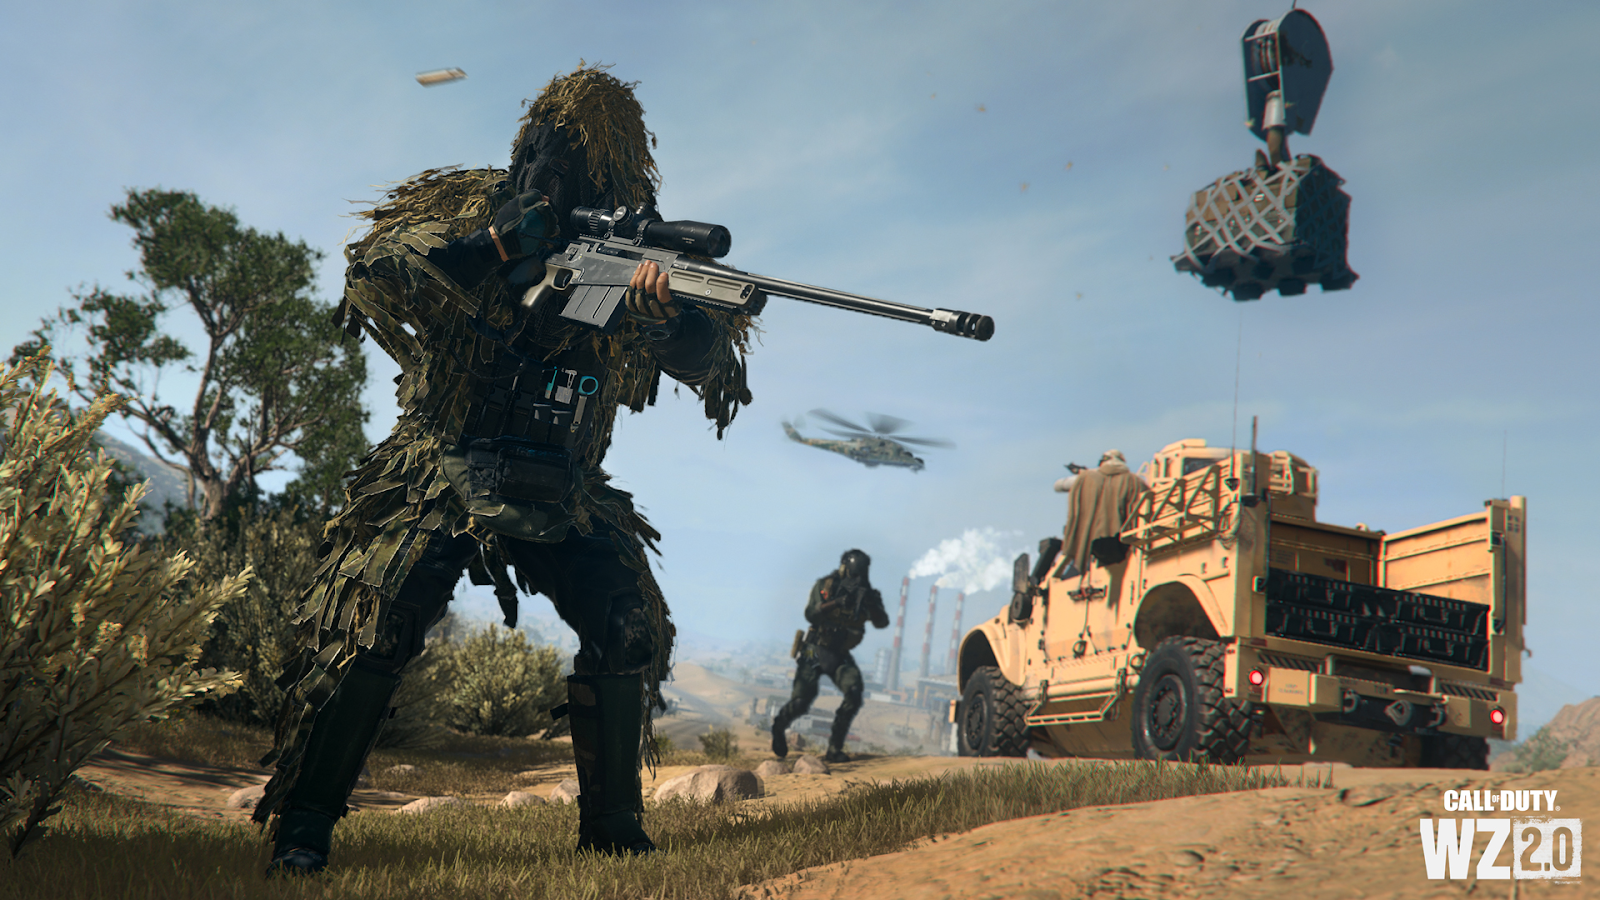 image from the game call of duty warzone showing a player using a sniper to shoot along with a car and an airdrop on the background